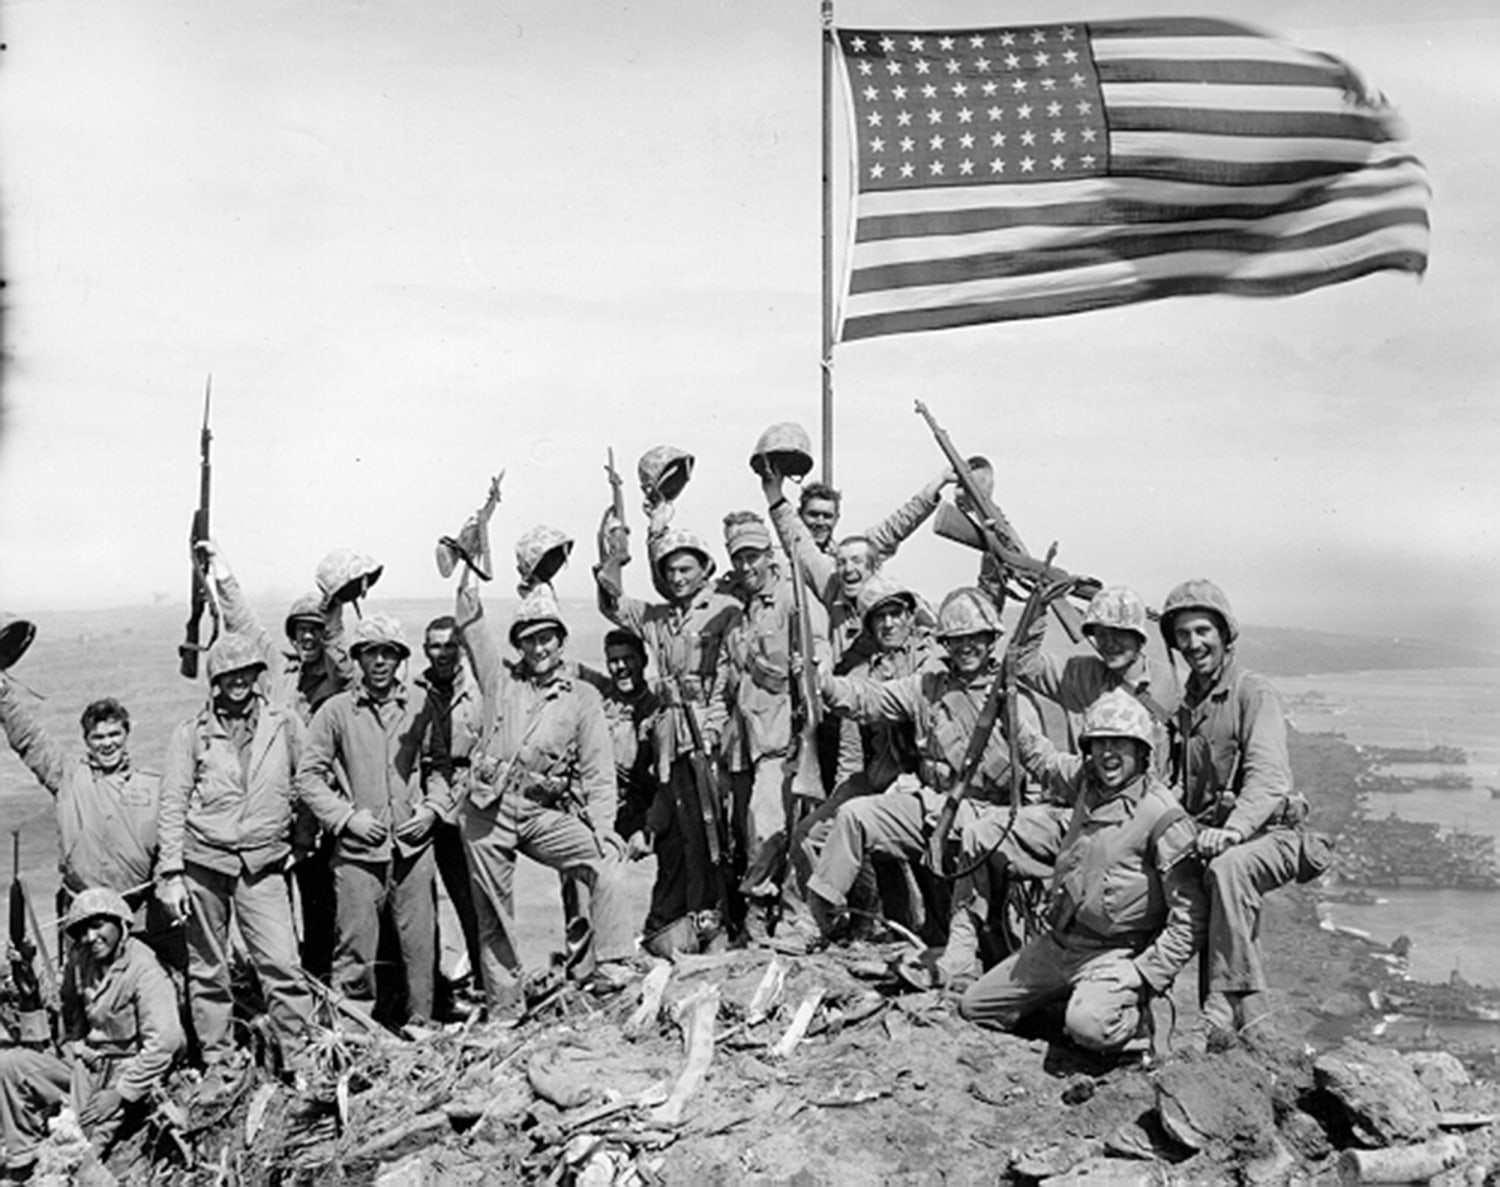 Star-Spangled Mystery: What Became of Lost Iwo Jima Flag-Raising Photos?